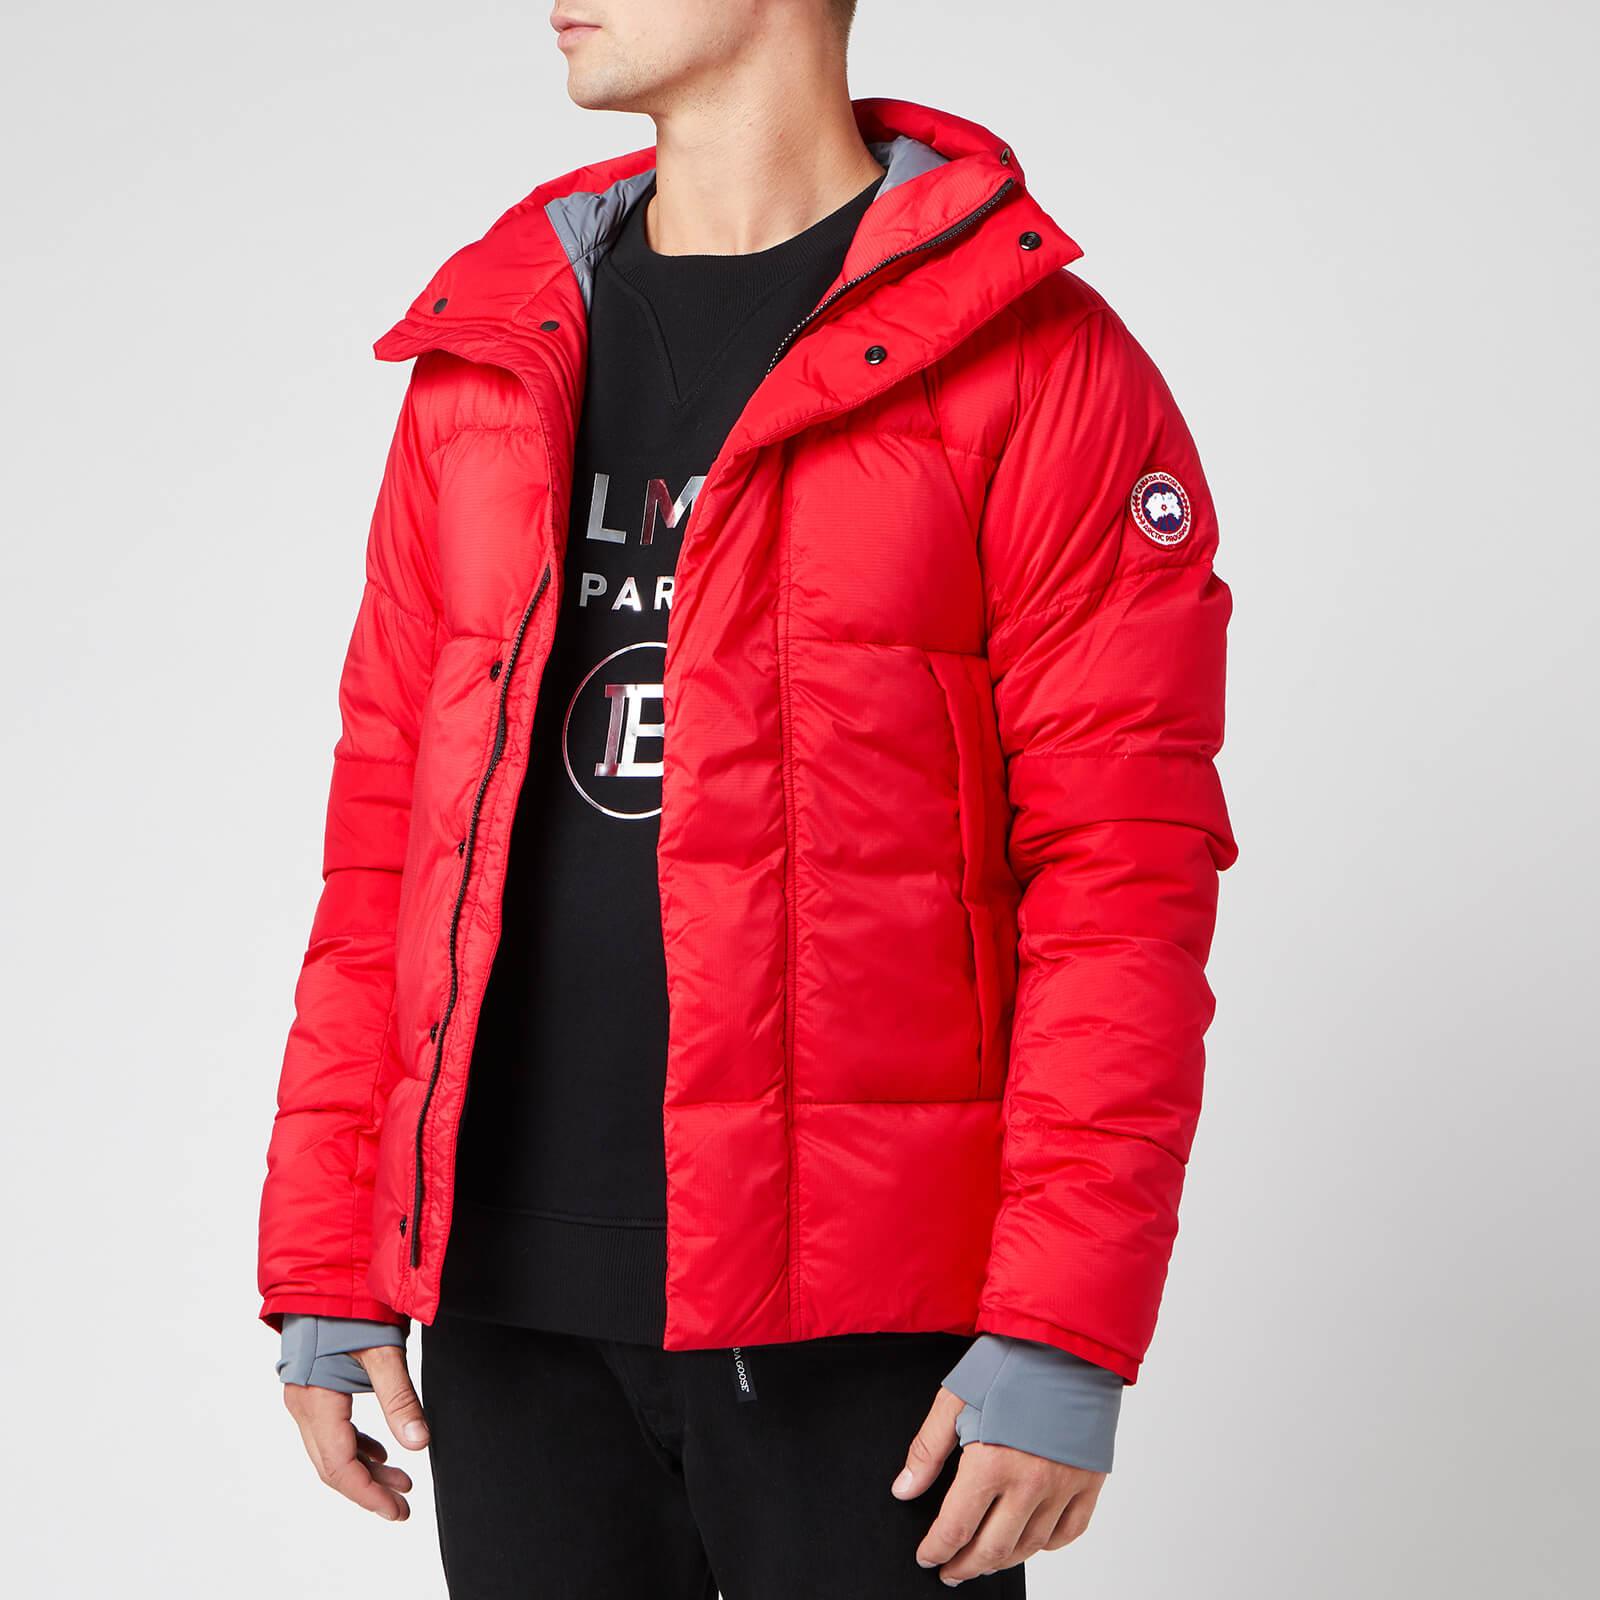 Canada Goose Goose Armstrong Hoody in Red for Men - Lyst